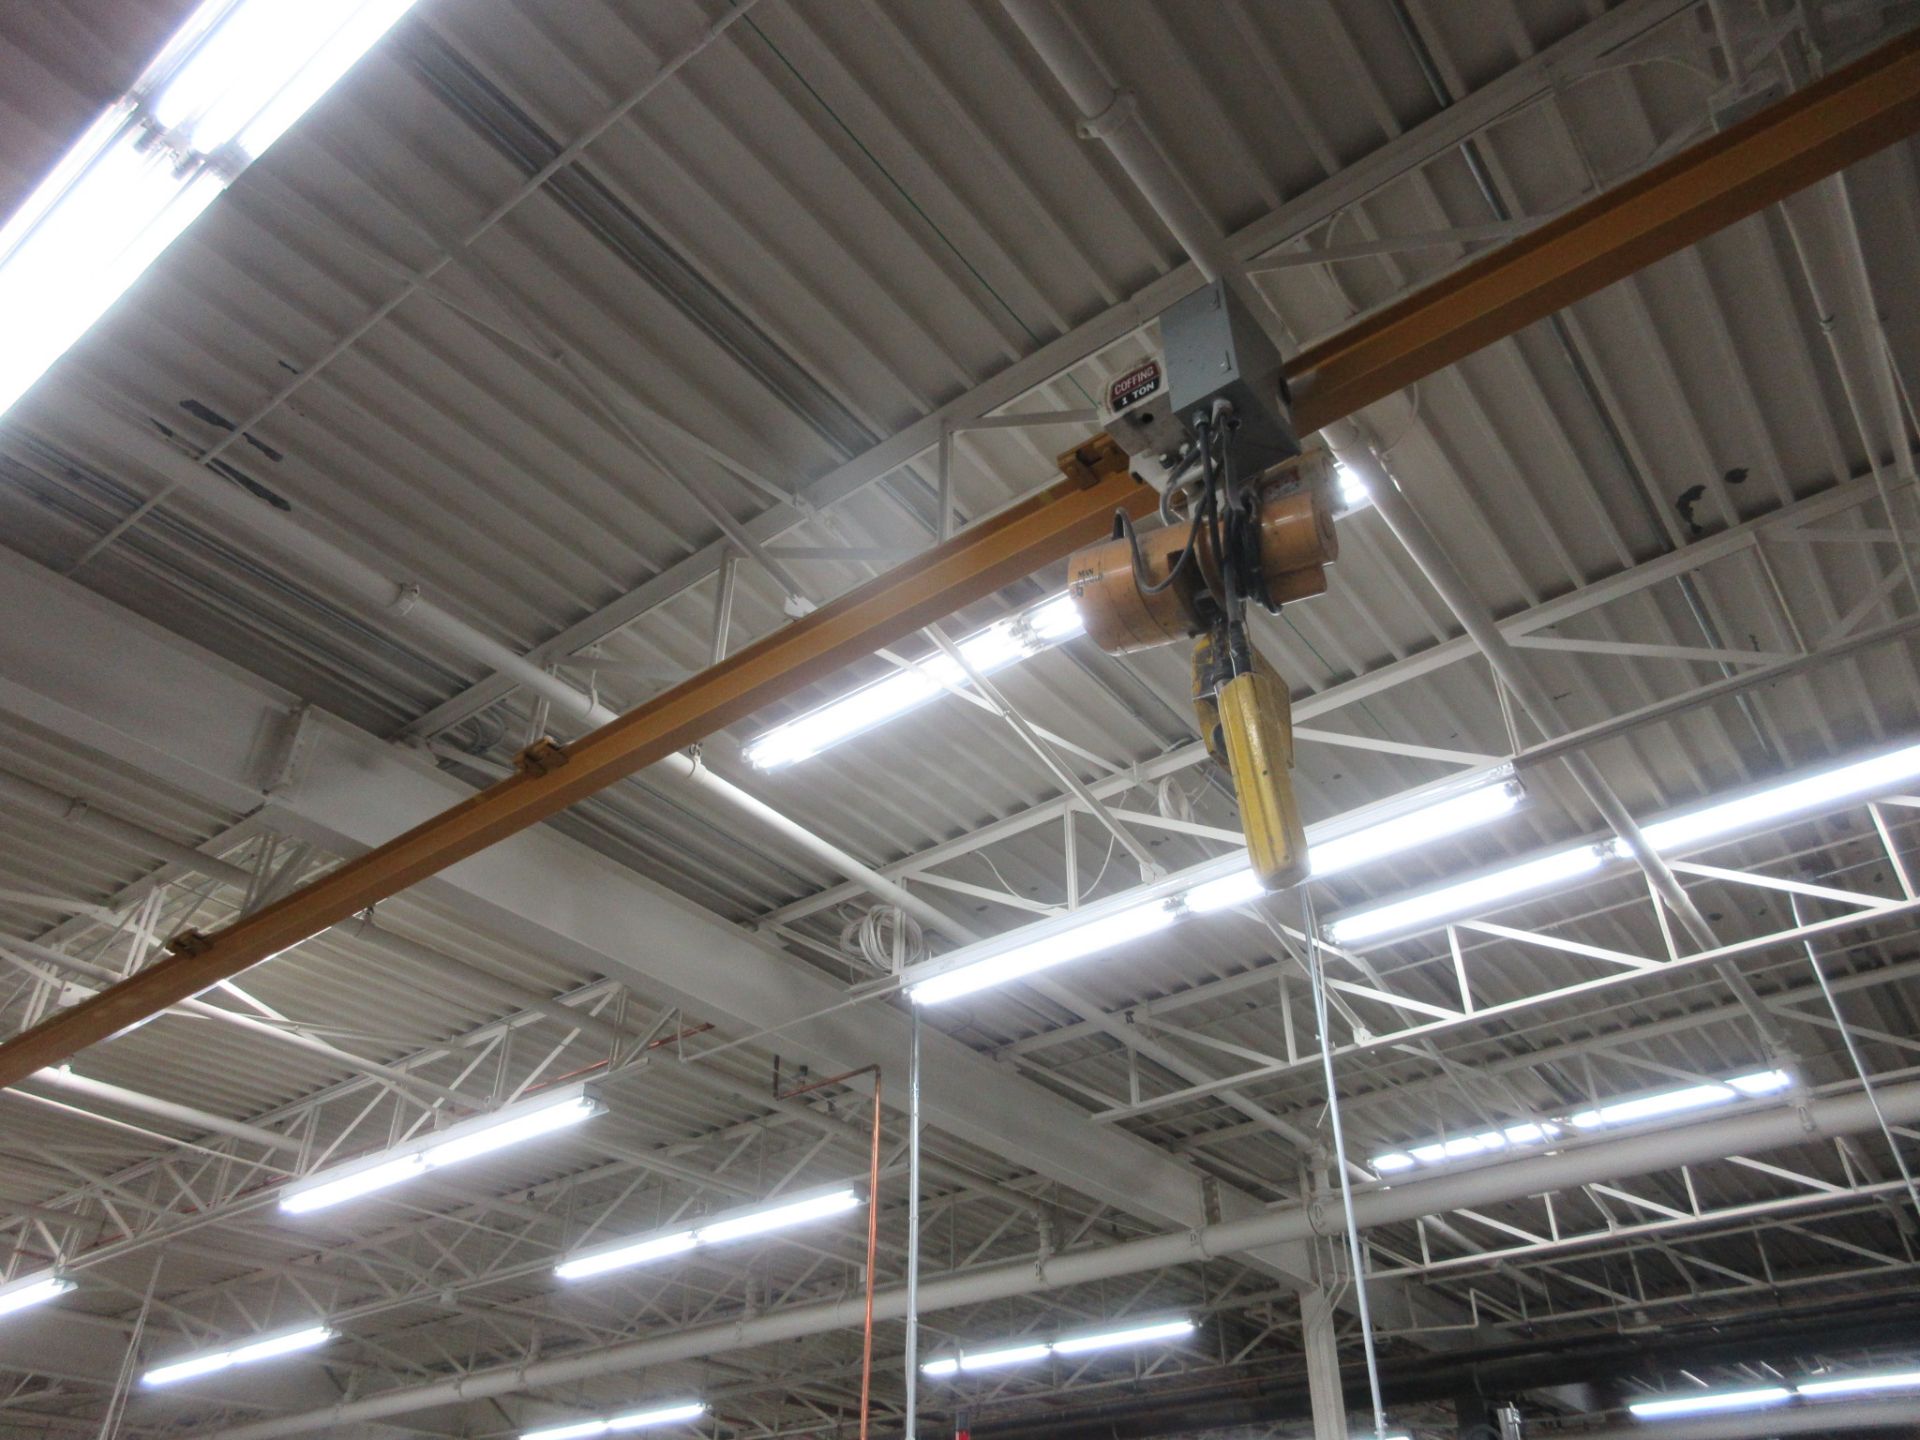 COFFING 1/2-TON CAP. ELECTRIC HOIST W/ PENDANT AND 40' I-BEAM BOLTED RUNWAY (NORTHEAST PLANT) - Image 2 of 2